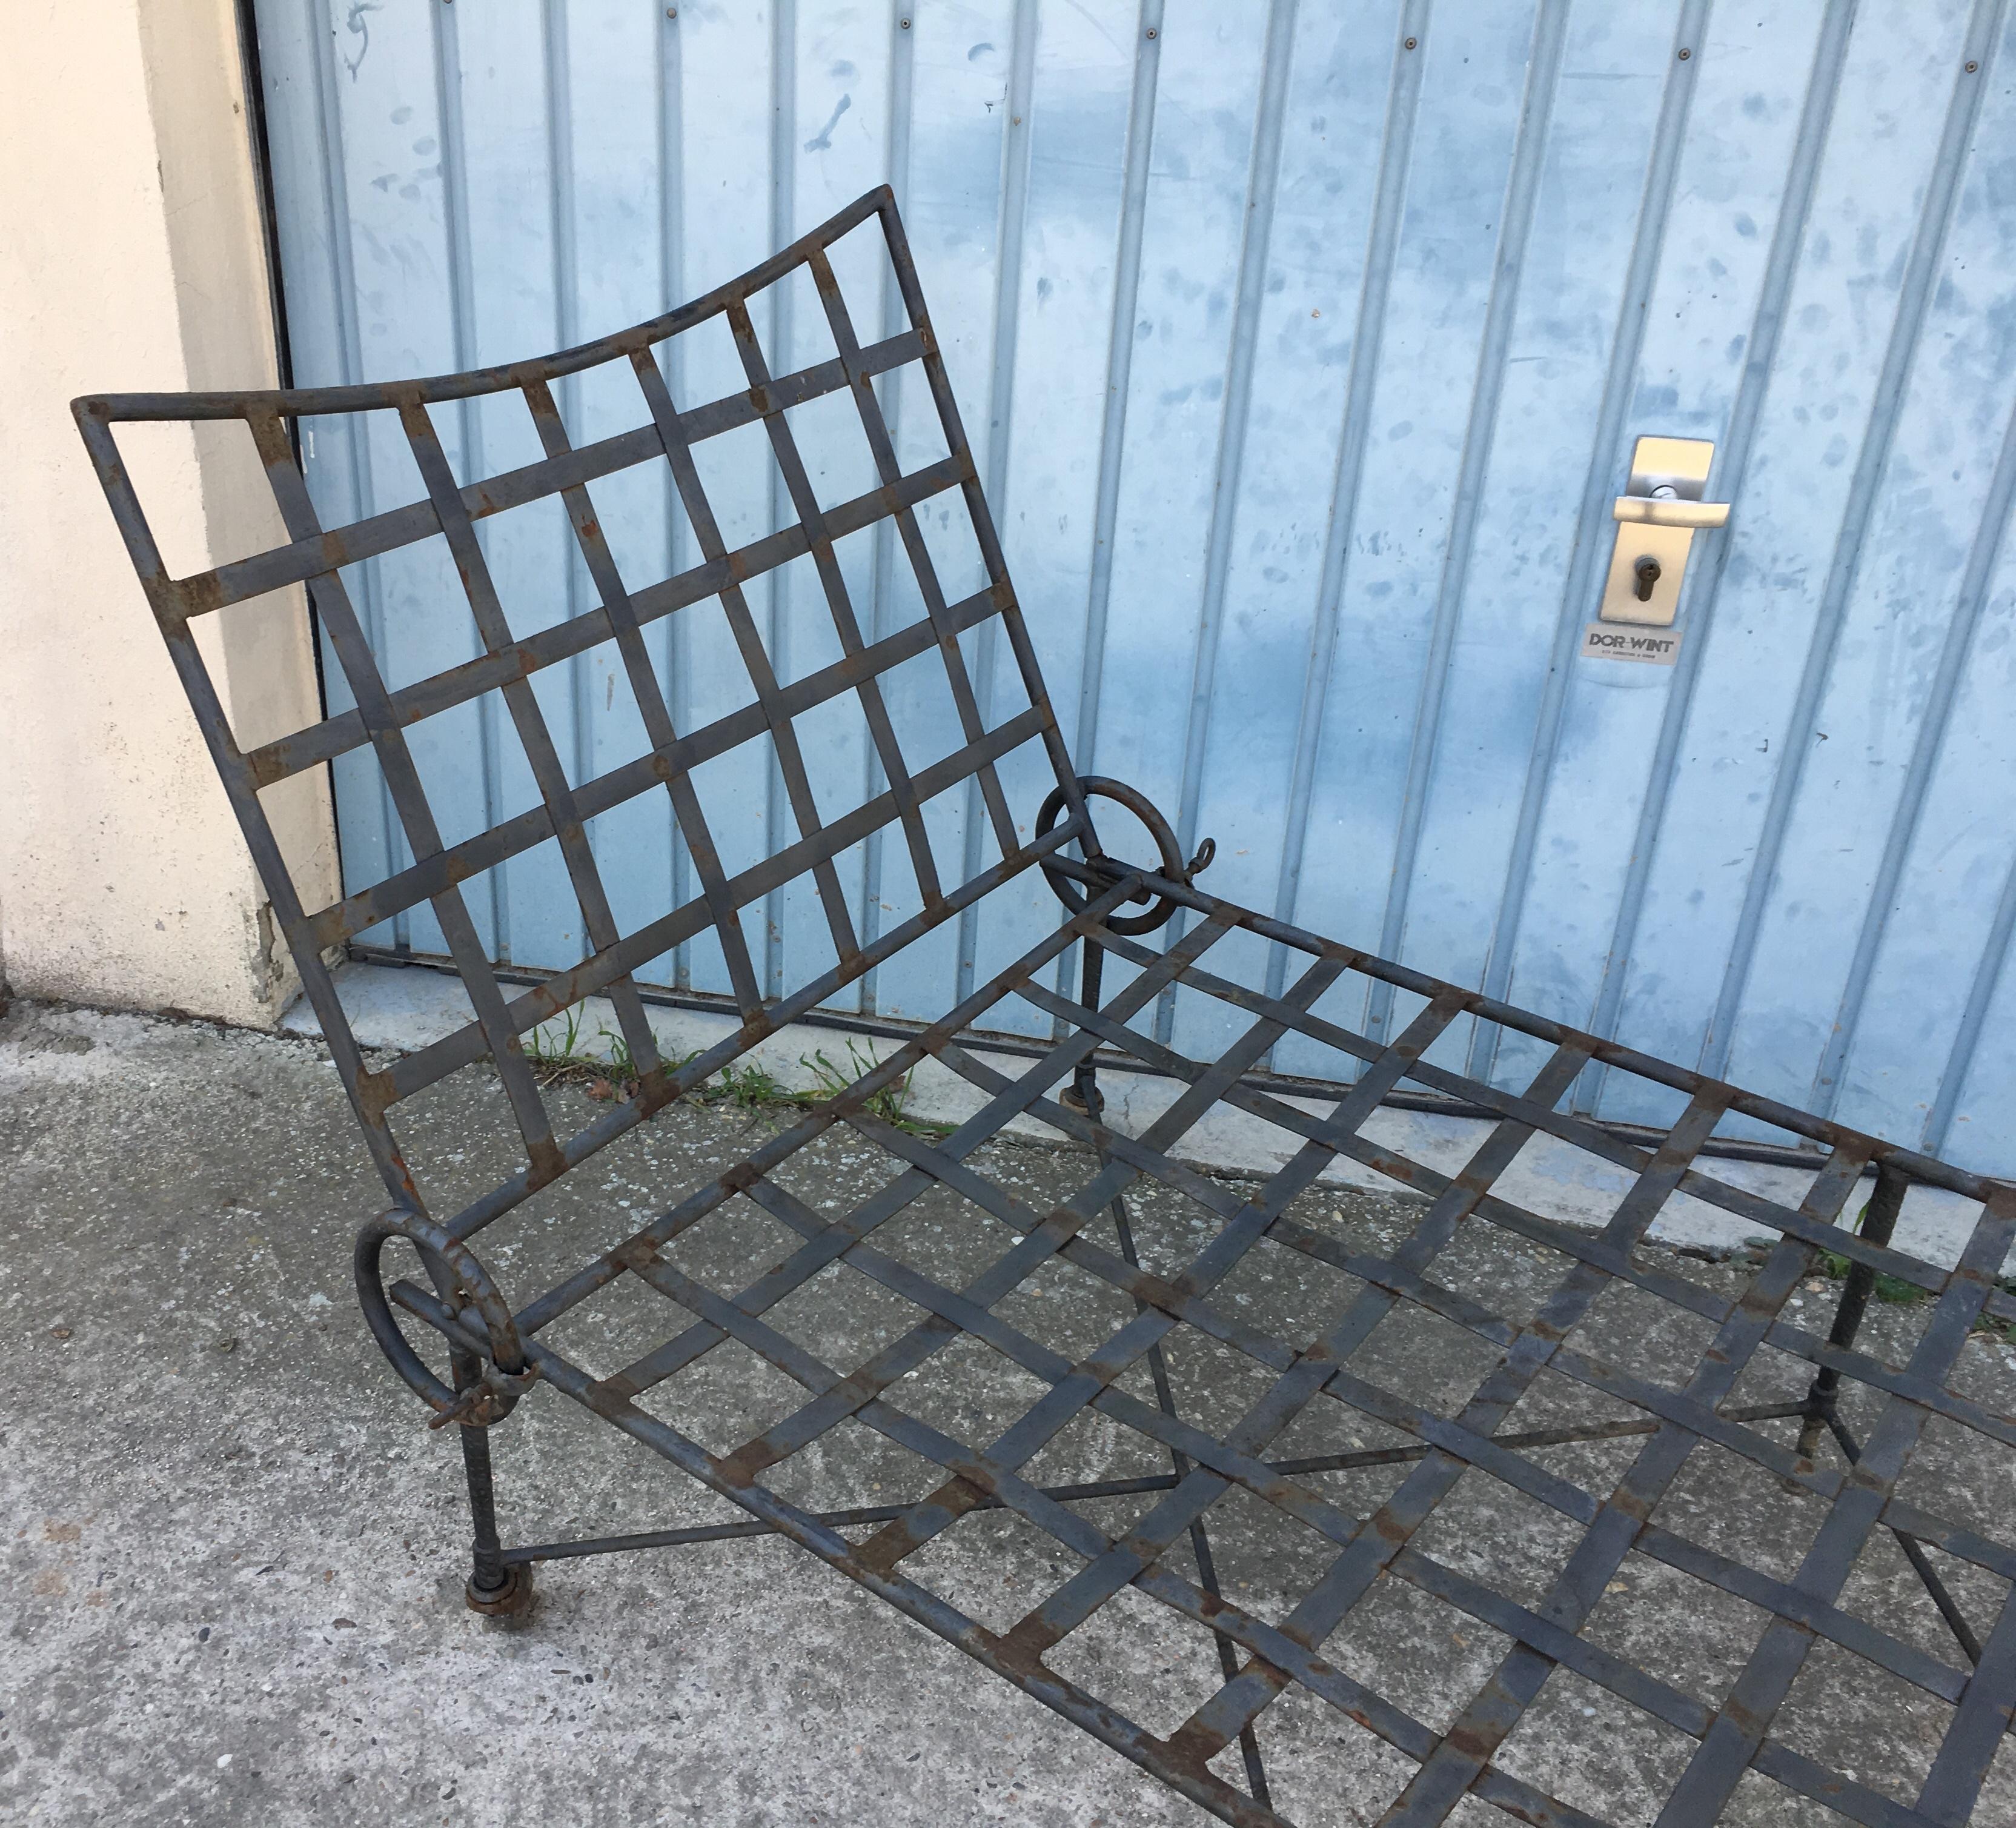 A wonderfully generous sized adjustable outdoor iron Hollywood Regency chaise lounge designed by Mario Papperzini for John Salterini Co., Inc. 

Beautifully designed vintage garden furnishing made in the USA in the early 1900s. The quality is